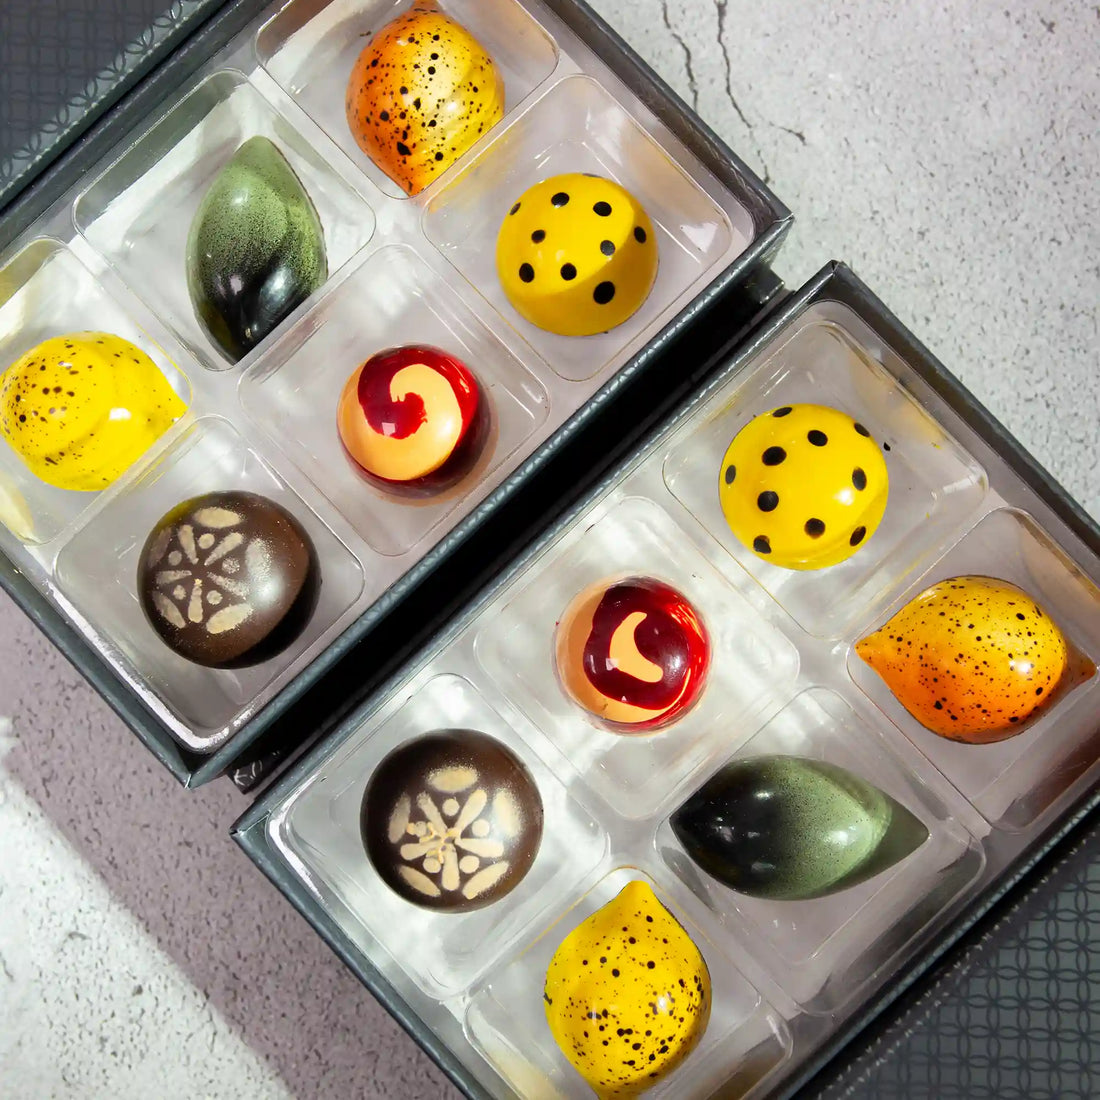 Fantasia Luxury chocolate gift box with 6 pieces of brightly painted citrus flavored chocolates